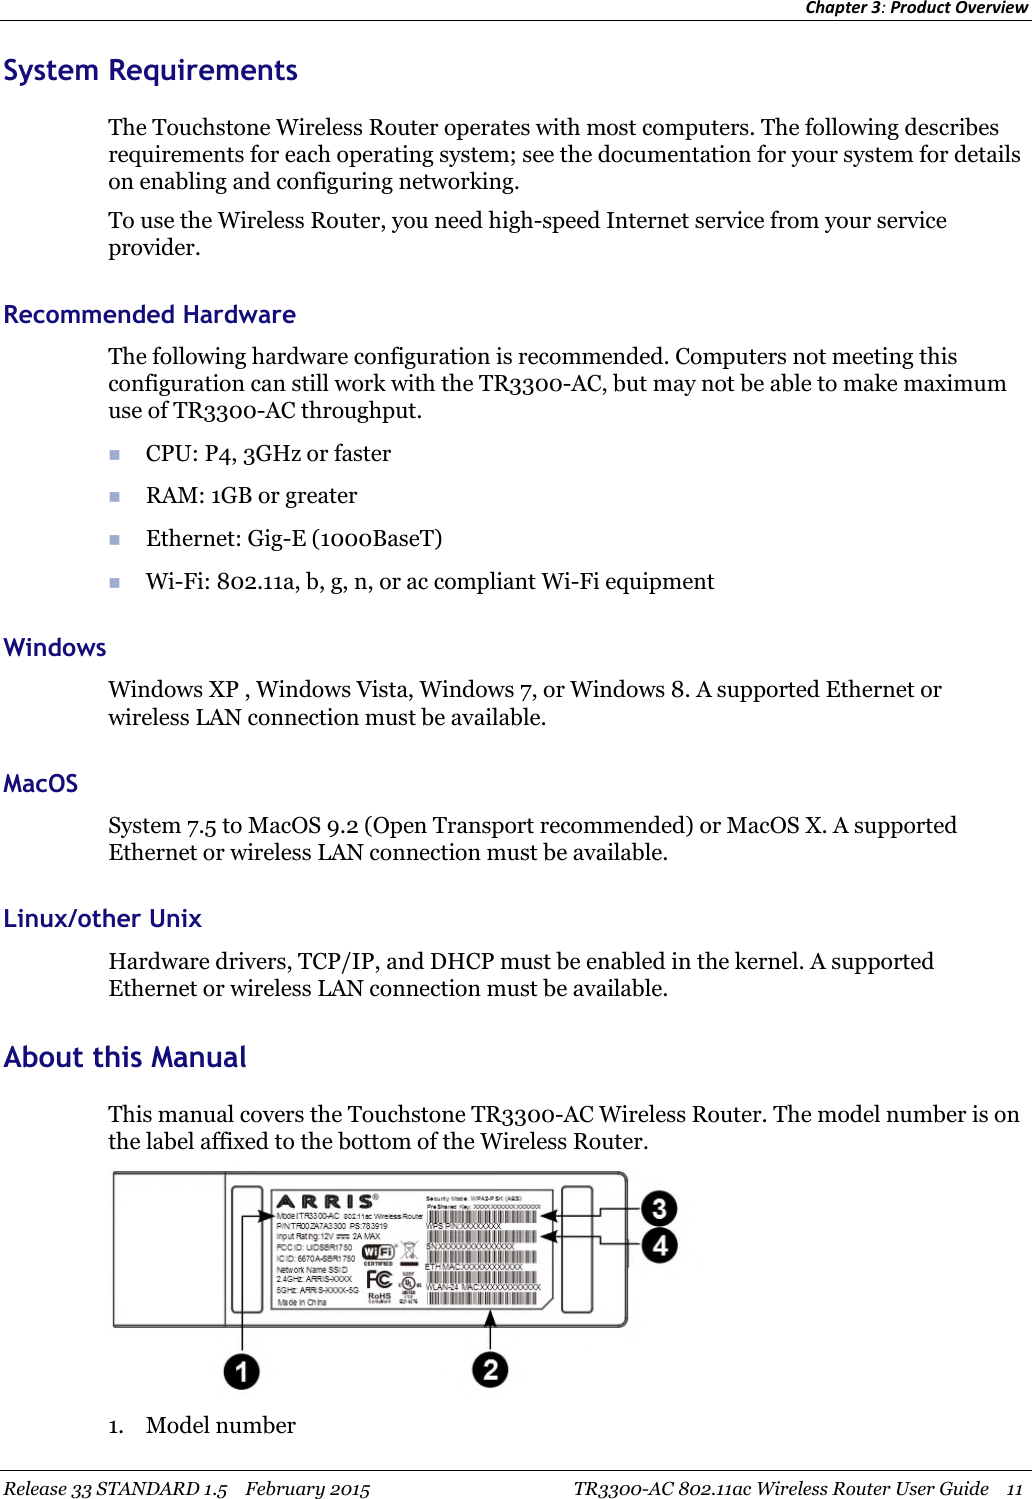 Chapter 3:Product OverviewRelease 33 STANDARD 1.5 February 2015 TR3300-AC 802.11ac Wireless Router User Guide 11System RequirementsThe Touchstone Wireless Router operates with most computers. The following describesrequirements for each operating system; see the documentation for your system for detailson enabling and configuring networking.To use the Wireless Router, you need high-speed Internet service from your serviceprovider.Recommended HardwareThe following hardware configuration is recommended. Computers not meeting thisconfiguration can still work with the TR3300-AC, but may not be able to make maximumuse of TR3300-AC throughput.CPU: P4, 3GHz or fasterRAM: 1GB or greaterEthernet: Gig-E (1000BaseT)Wi-Fi: 802.11a, b, g, n, or ac compliant Wi-Fi equipmentWindowsWindows XP , Windows Vista, Windows 7, or Windows 8. A supported Ethernet orwireless LAN connection must be available.MacOSSystem 7.5 to MacOS 9.2 (Open Transport recommended) or MacOS X. A supportedEthernet or wireless LAN connection must be available.Linux/other UnixHardware drivers, TCP/IP, and DHCP must be enabled in the kernel. A supportedEthernet or wireless LAN connection must be available.About this ManualThis manual covers the Touchstone TR3300-AC Wireless Router. The model number is onthe label affixed to the bottom of the Wireless Router.1. Model number